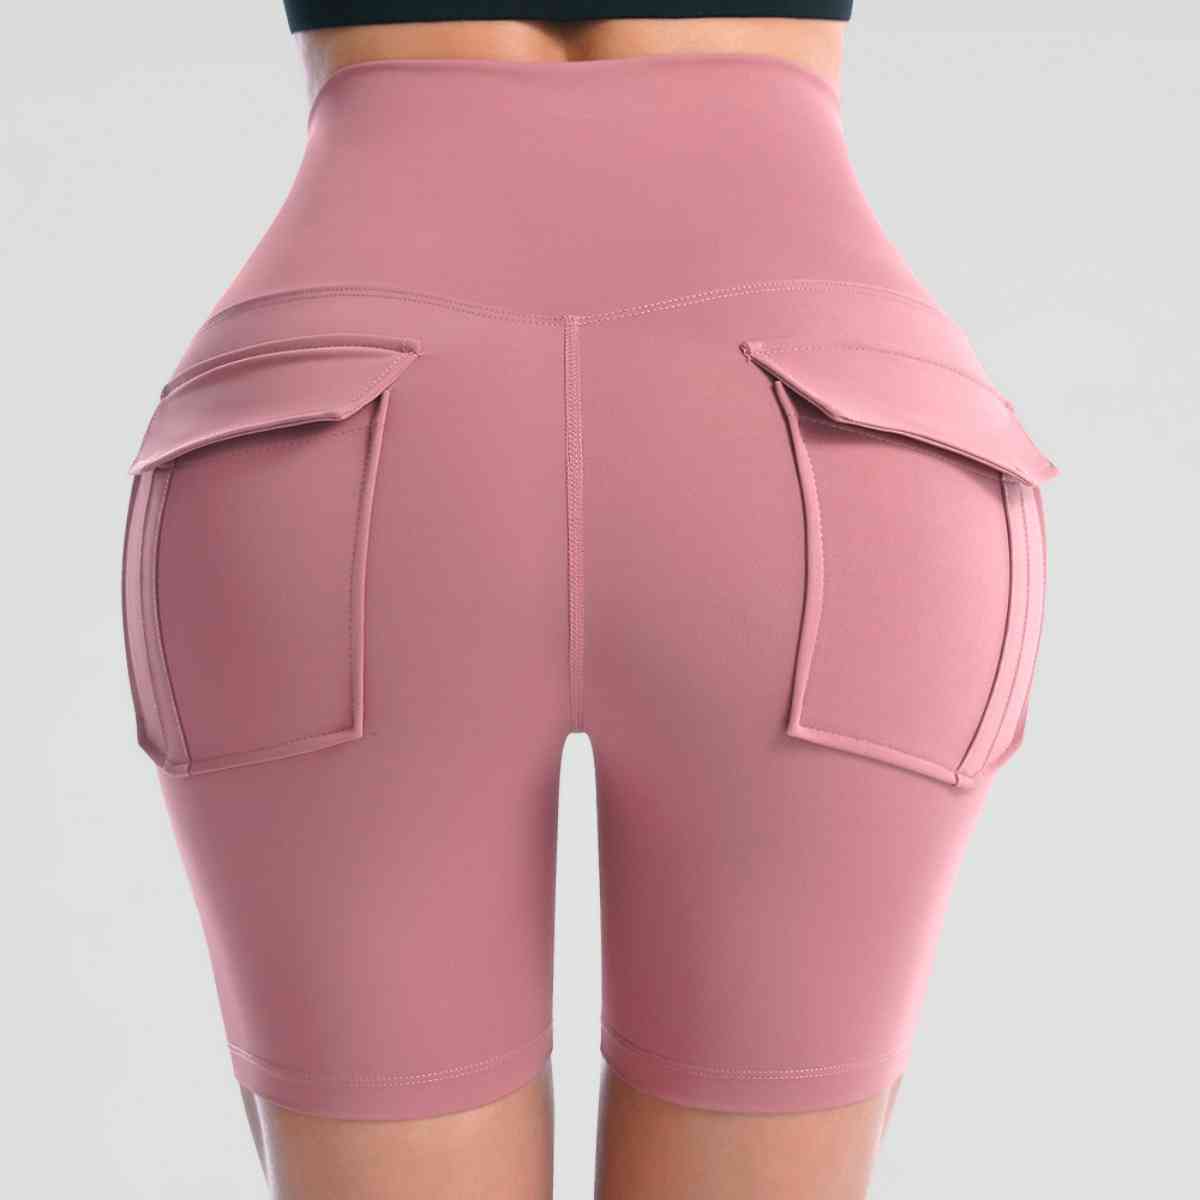 Women's Performance Sports Shorts with Spacious Pockets